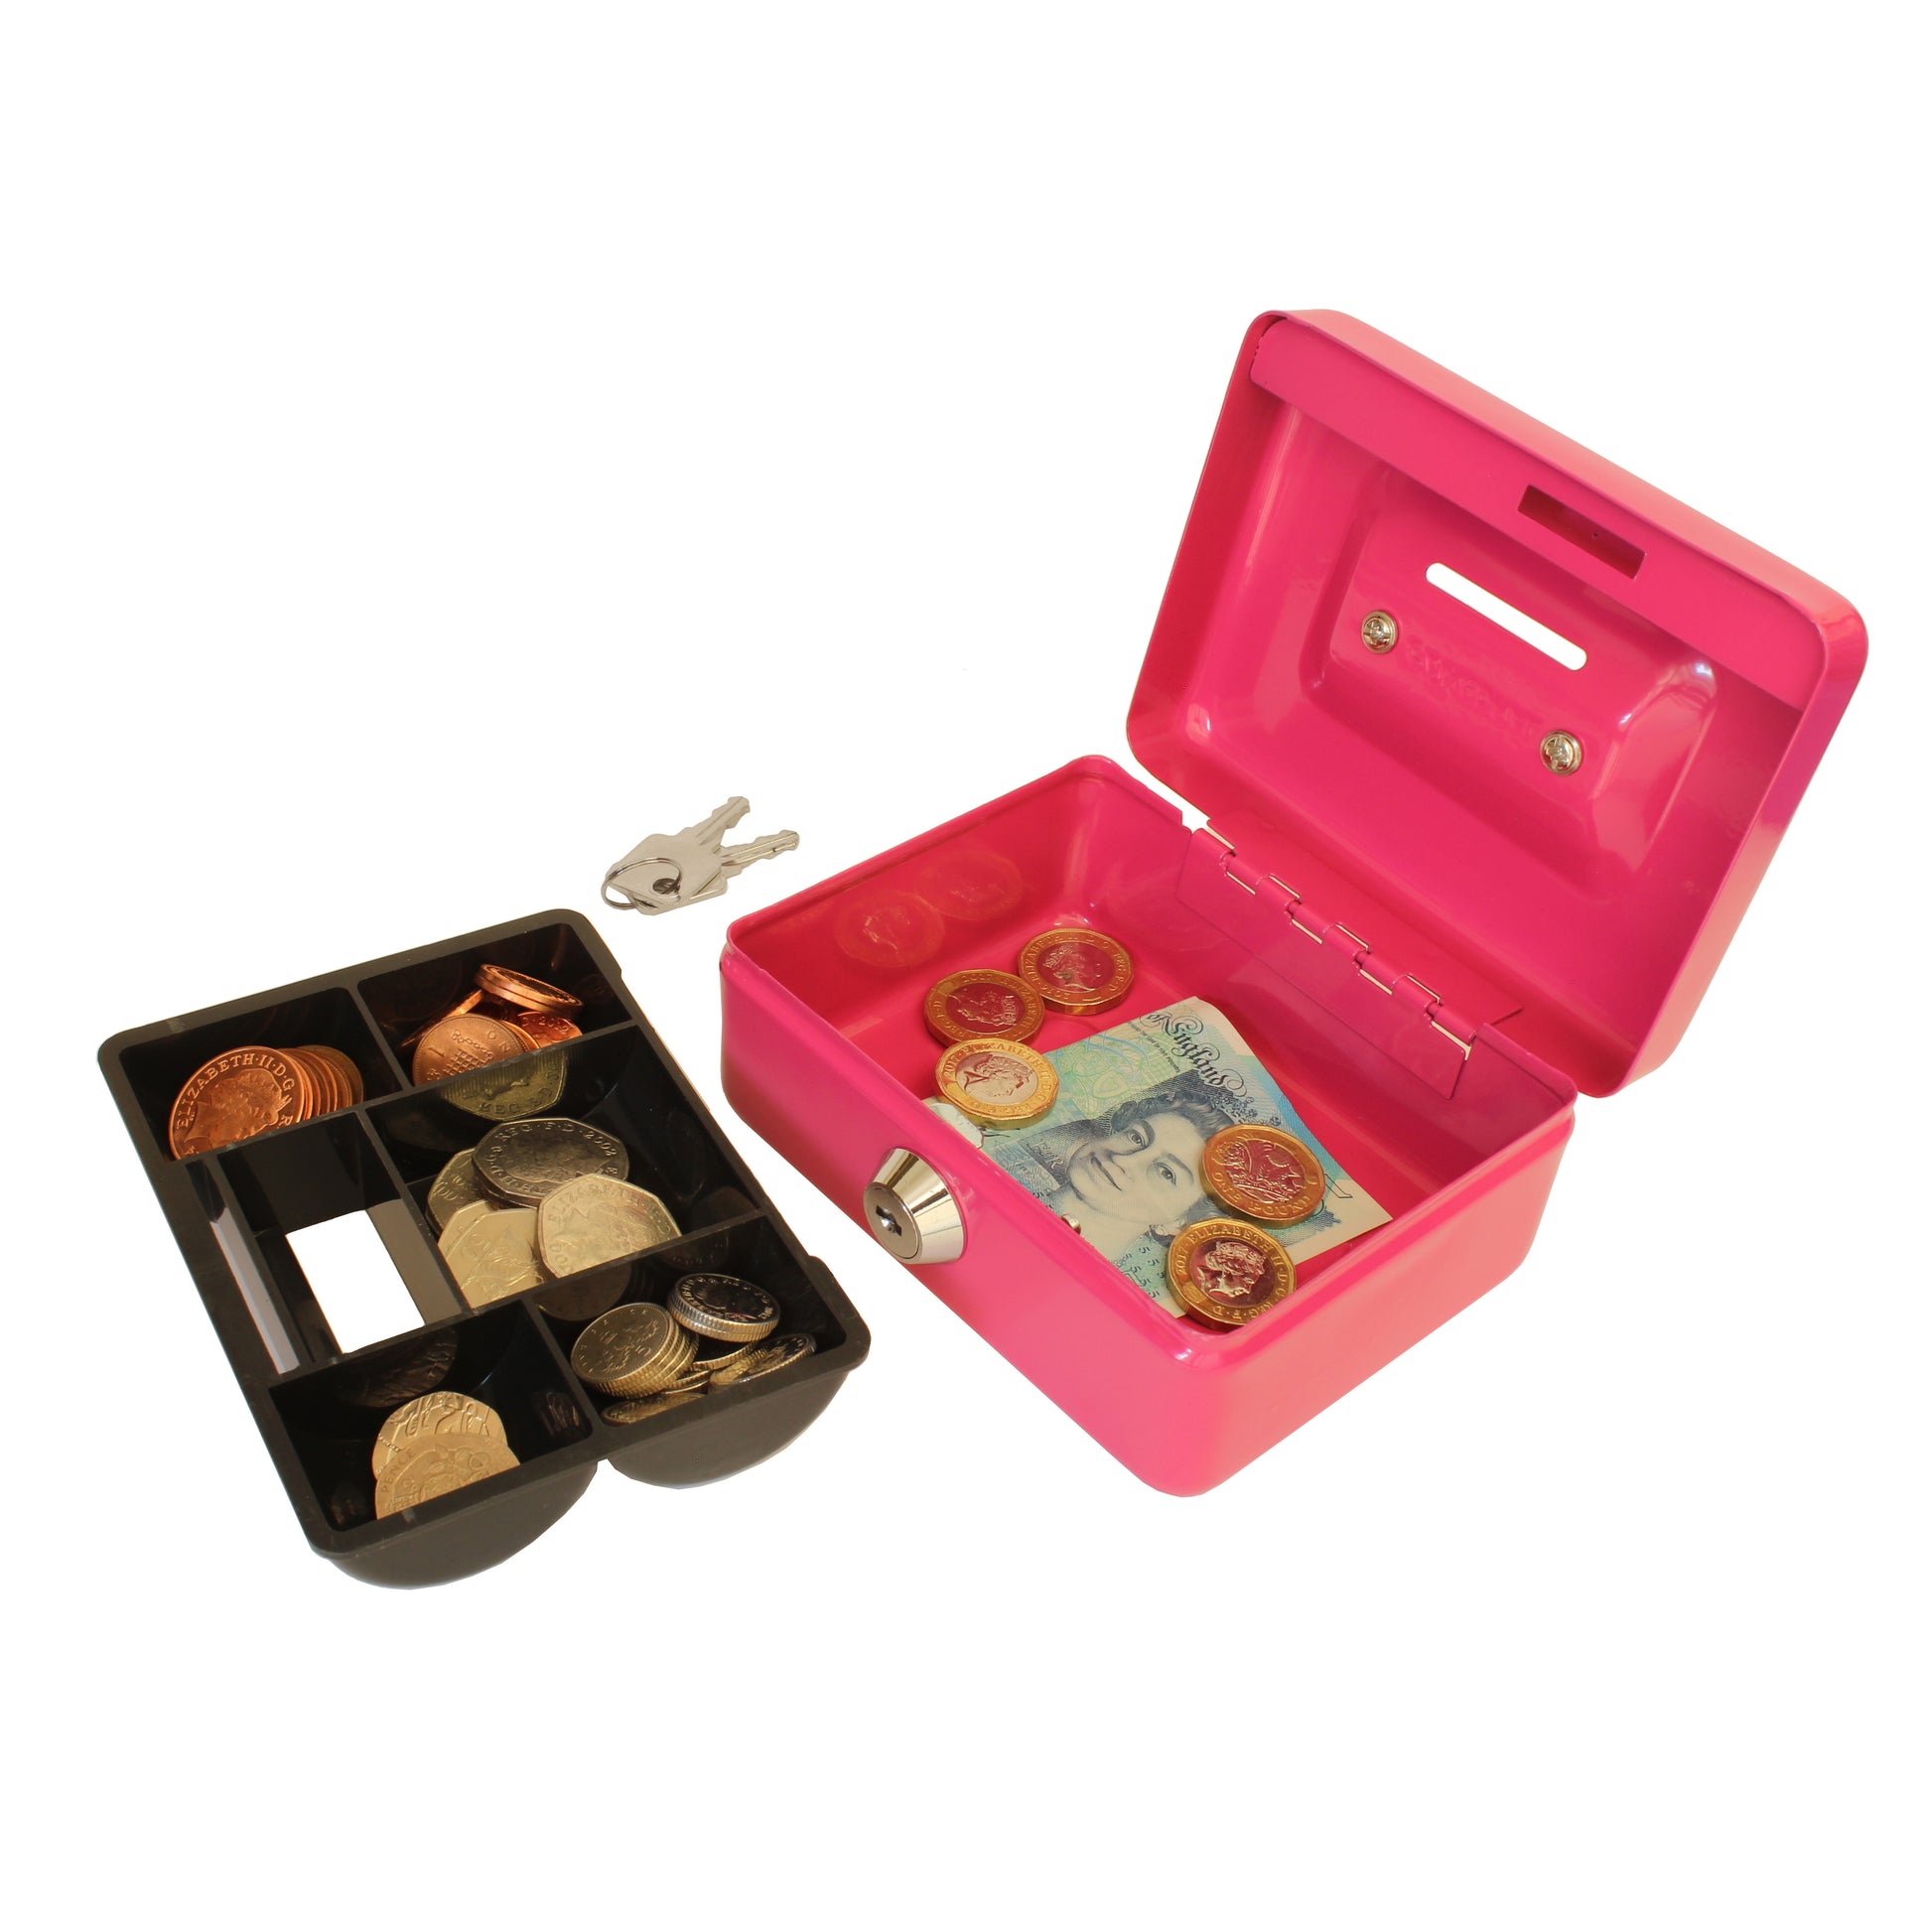 An open, bright pink, 4-inch key lockable cash box with a coin slot in the lid and a removable 5-compartment coin tray, displaying an assortment of coins and banknotes. Two keys are placed beside the box, indicating its secure lock mechanism.